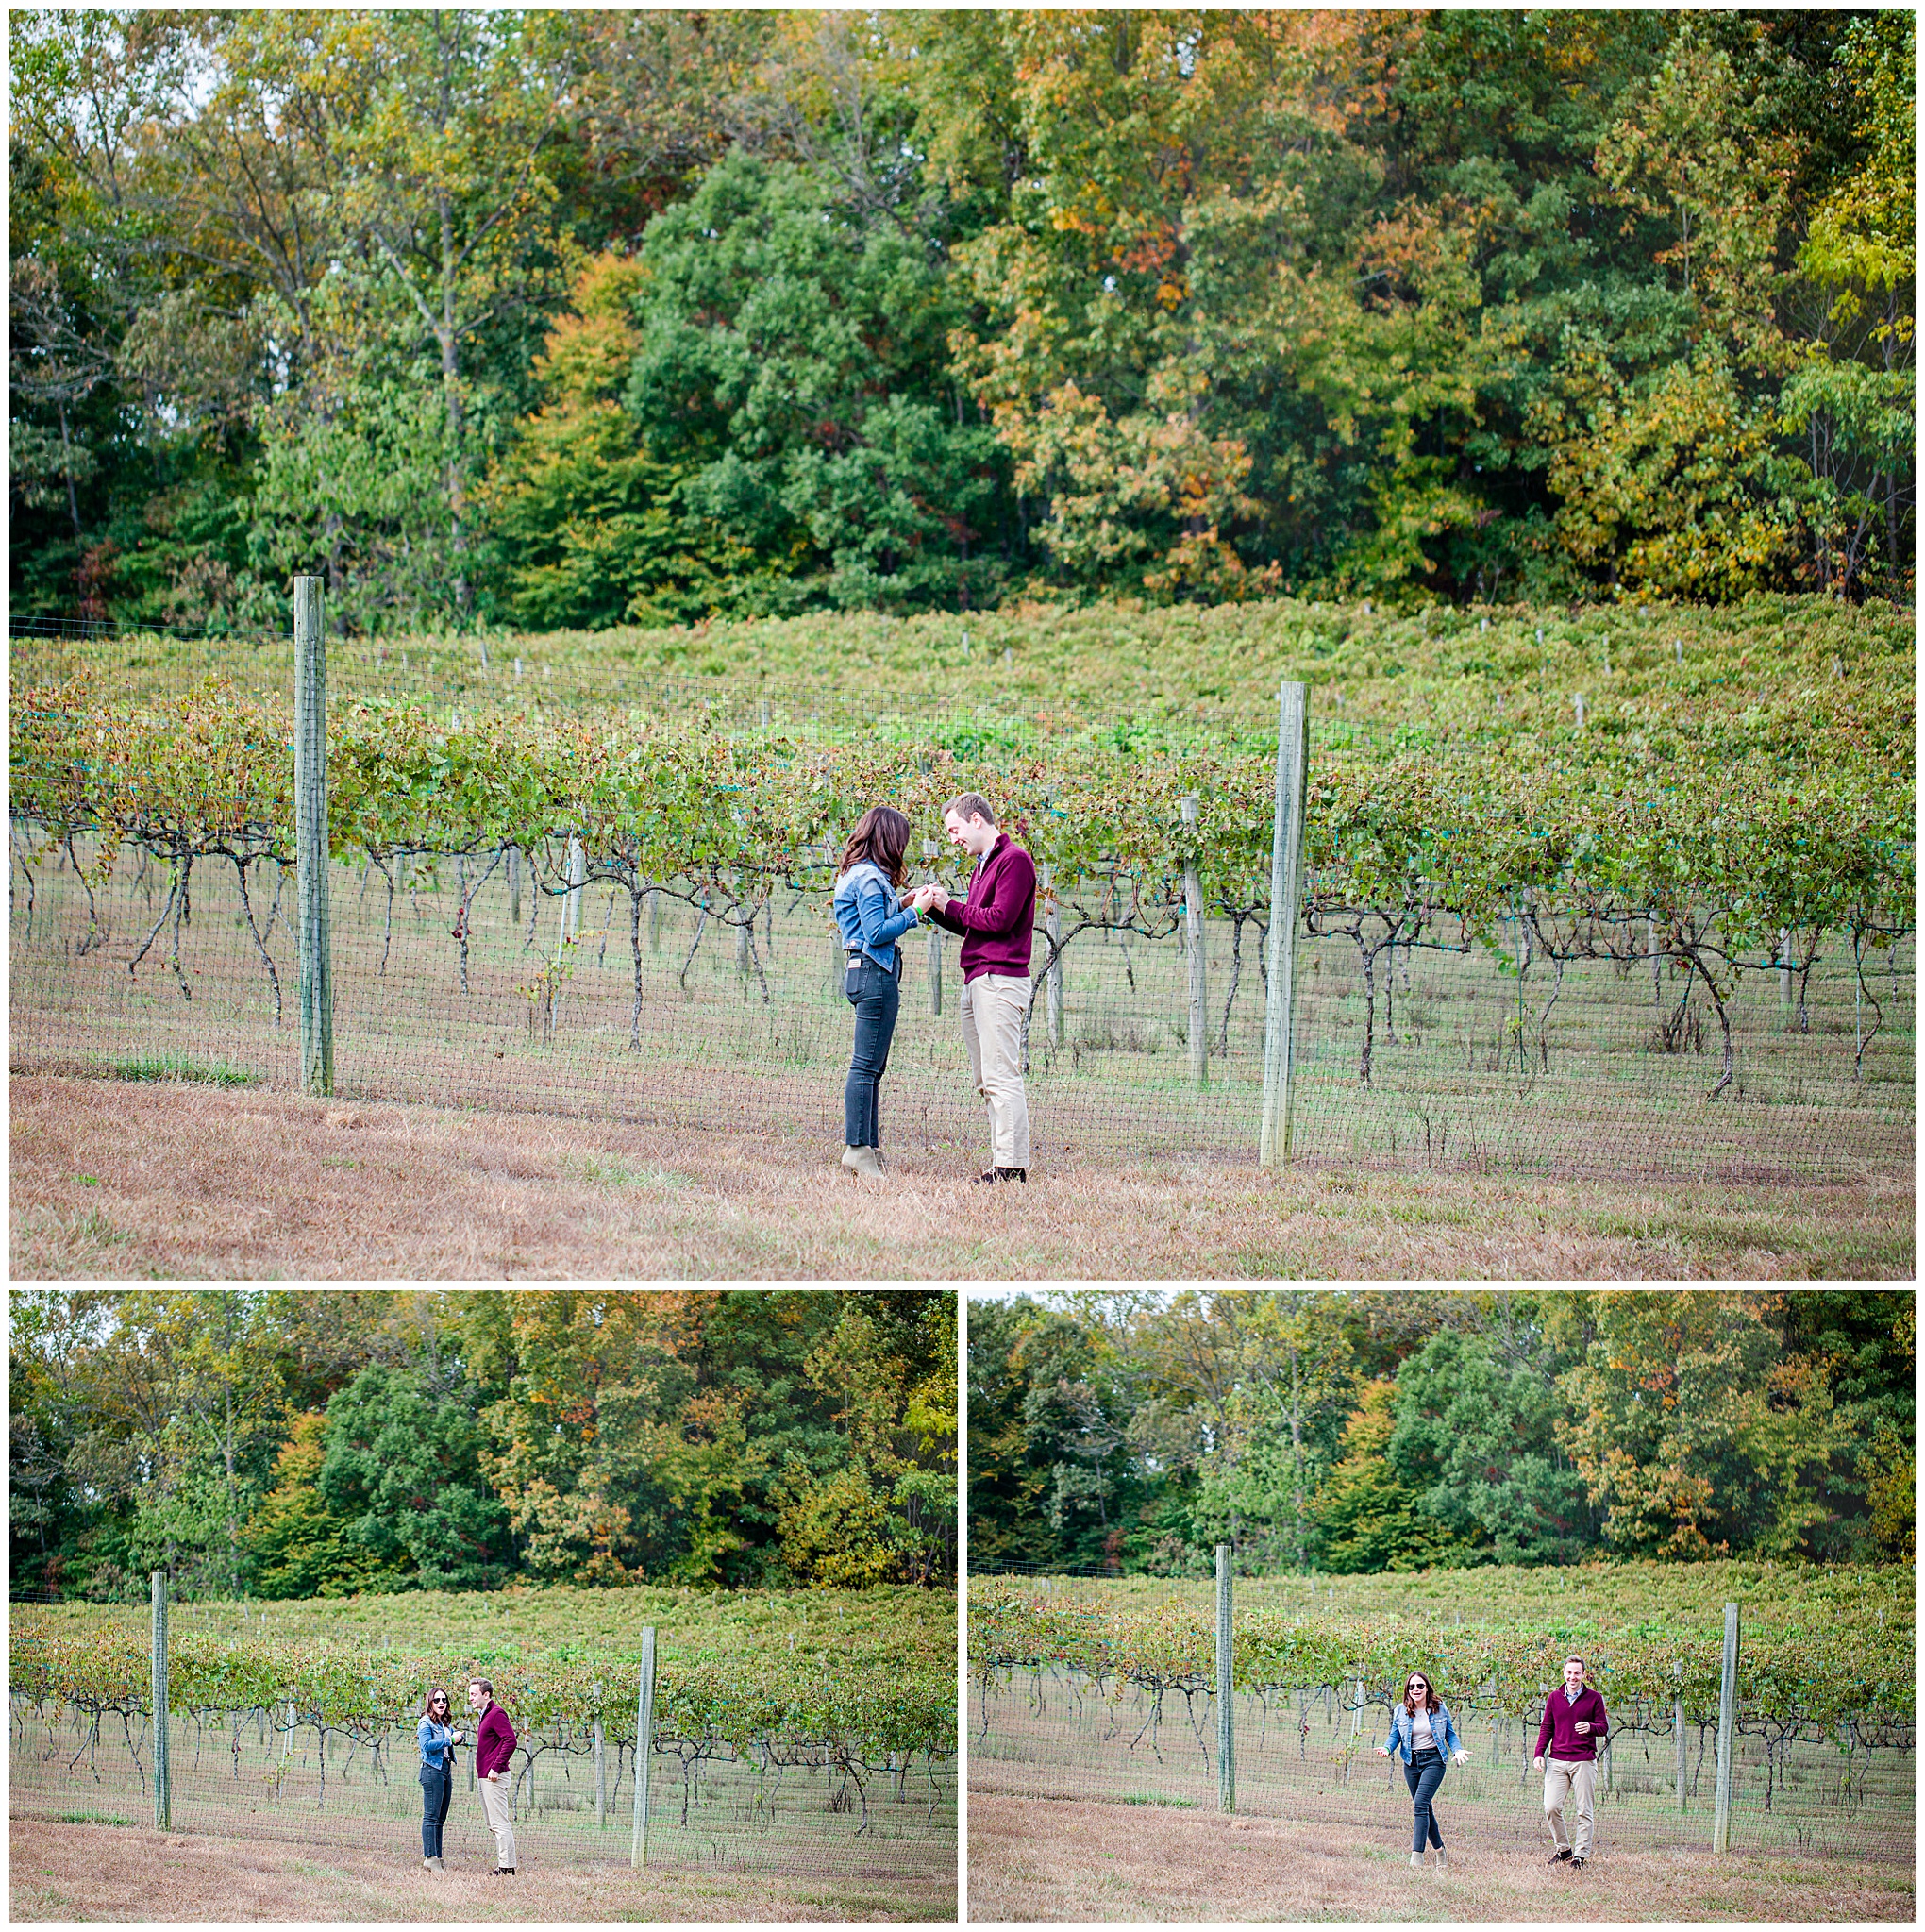 Running Hare Vineyard surprise proposal, Maryland winery, Maryland proposal photographer, D.C. proposal photographer, Maryland engagement, surprise proposal, Running Hare Vineyard proposal, Running Hare Vineyard, D.C. wedding photographer, Rachel E.H. Photography, autumn proposal, autumn surprise proposal, autumn scenery